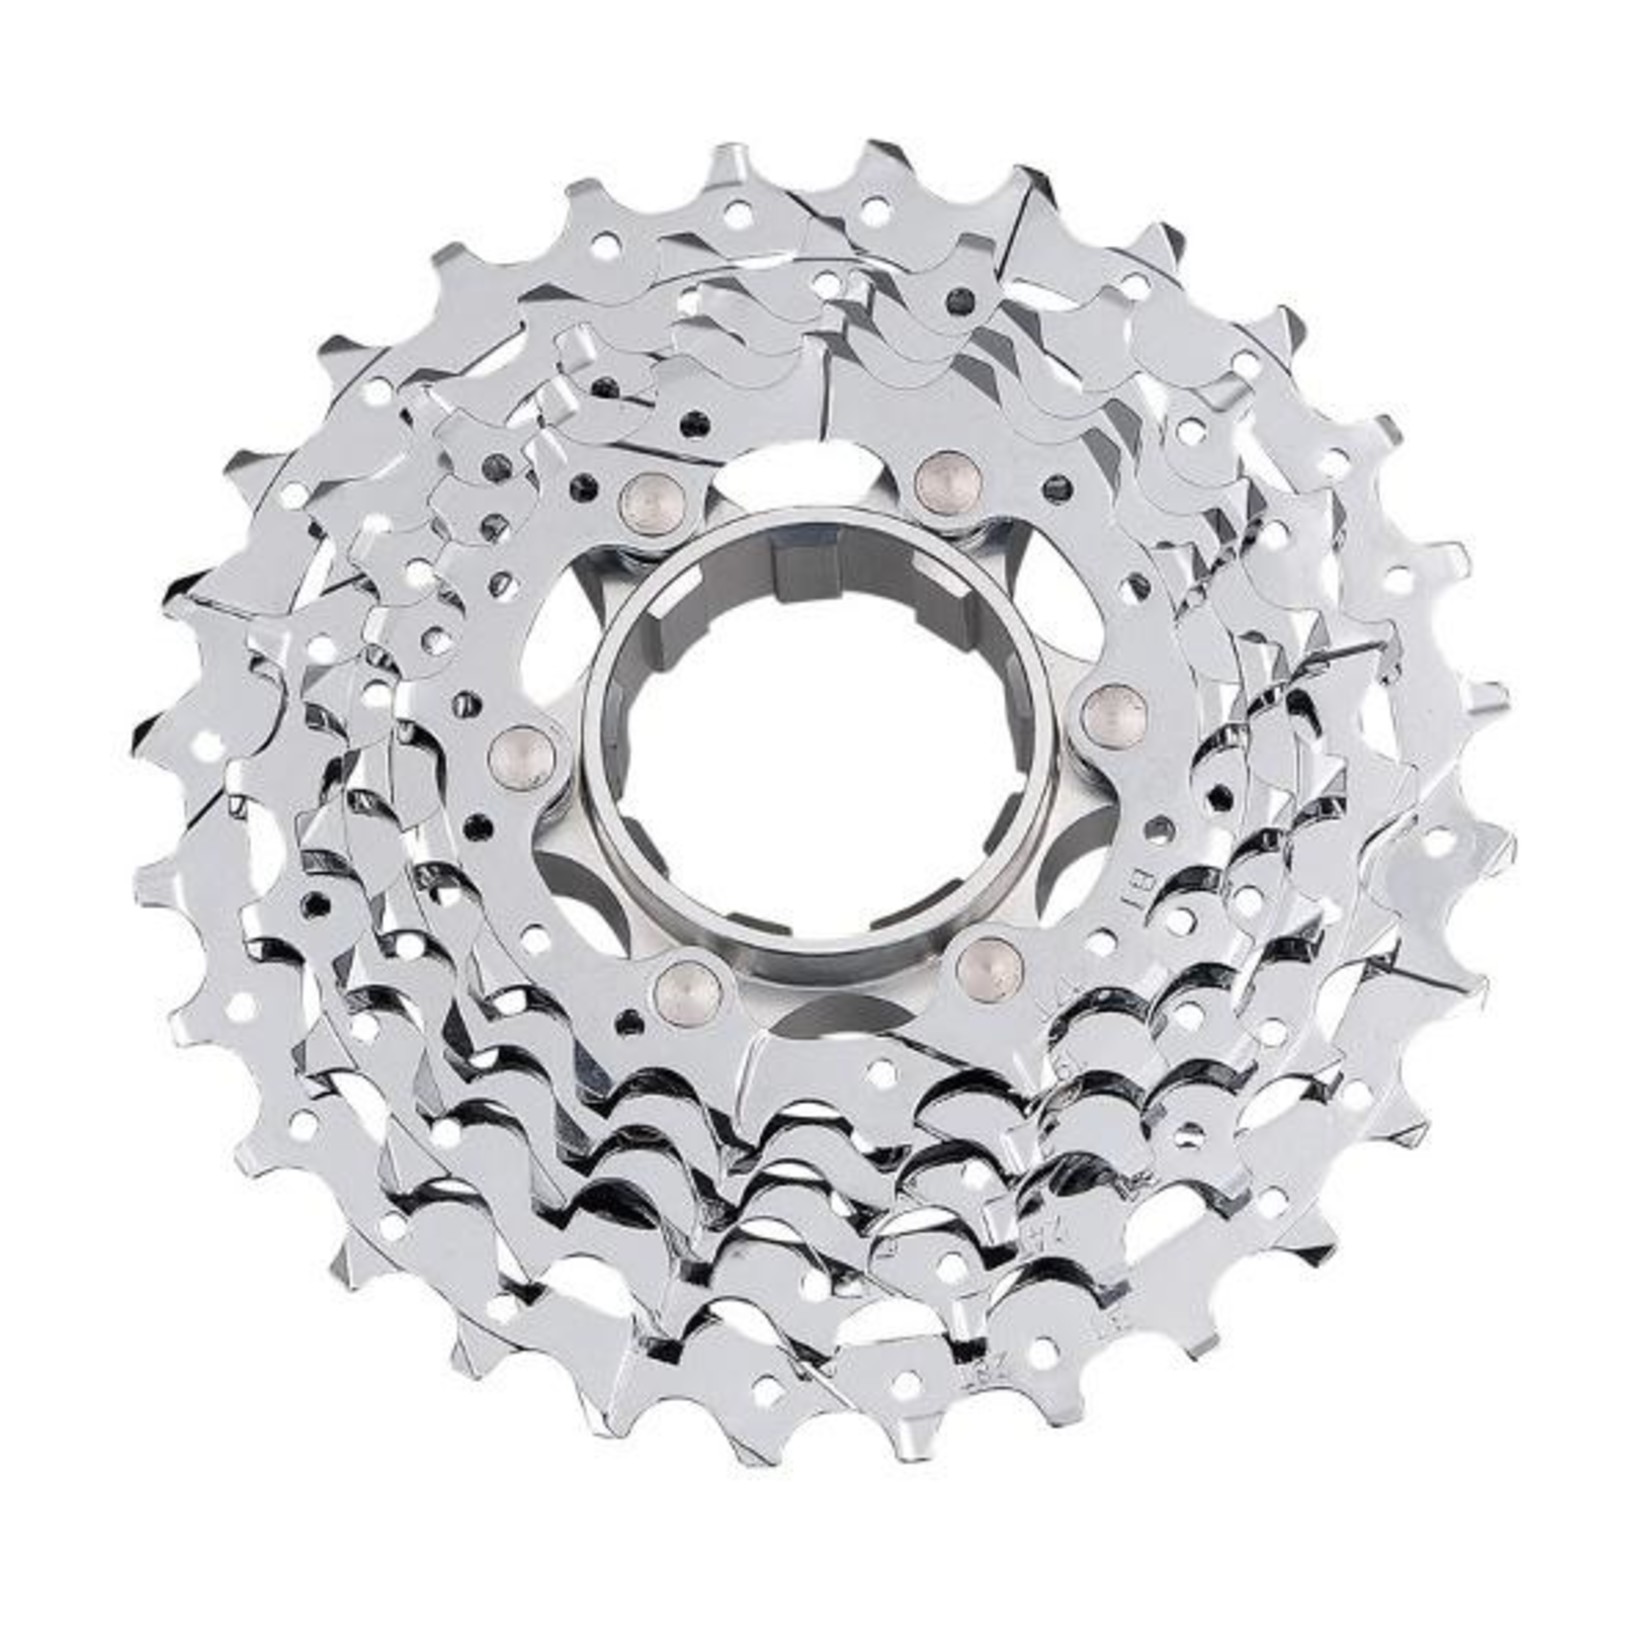 Microshift Microshift Bicycle Cassette - 10 Speed - 11-28T - Chrome Plated